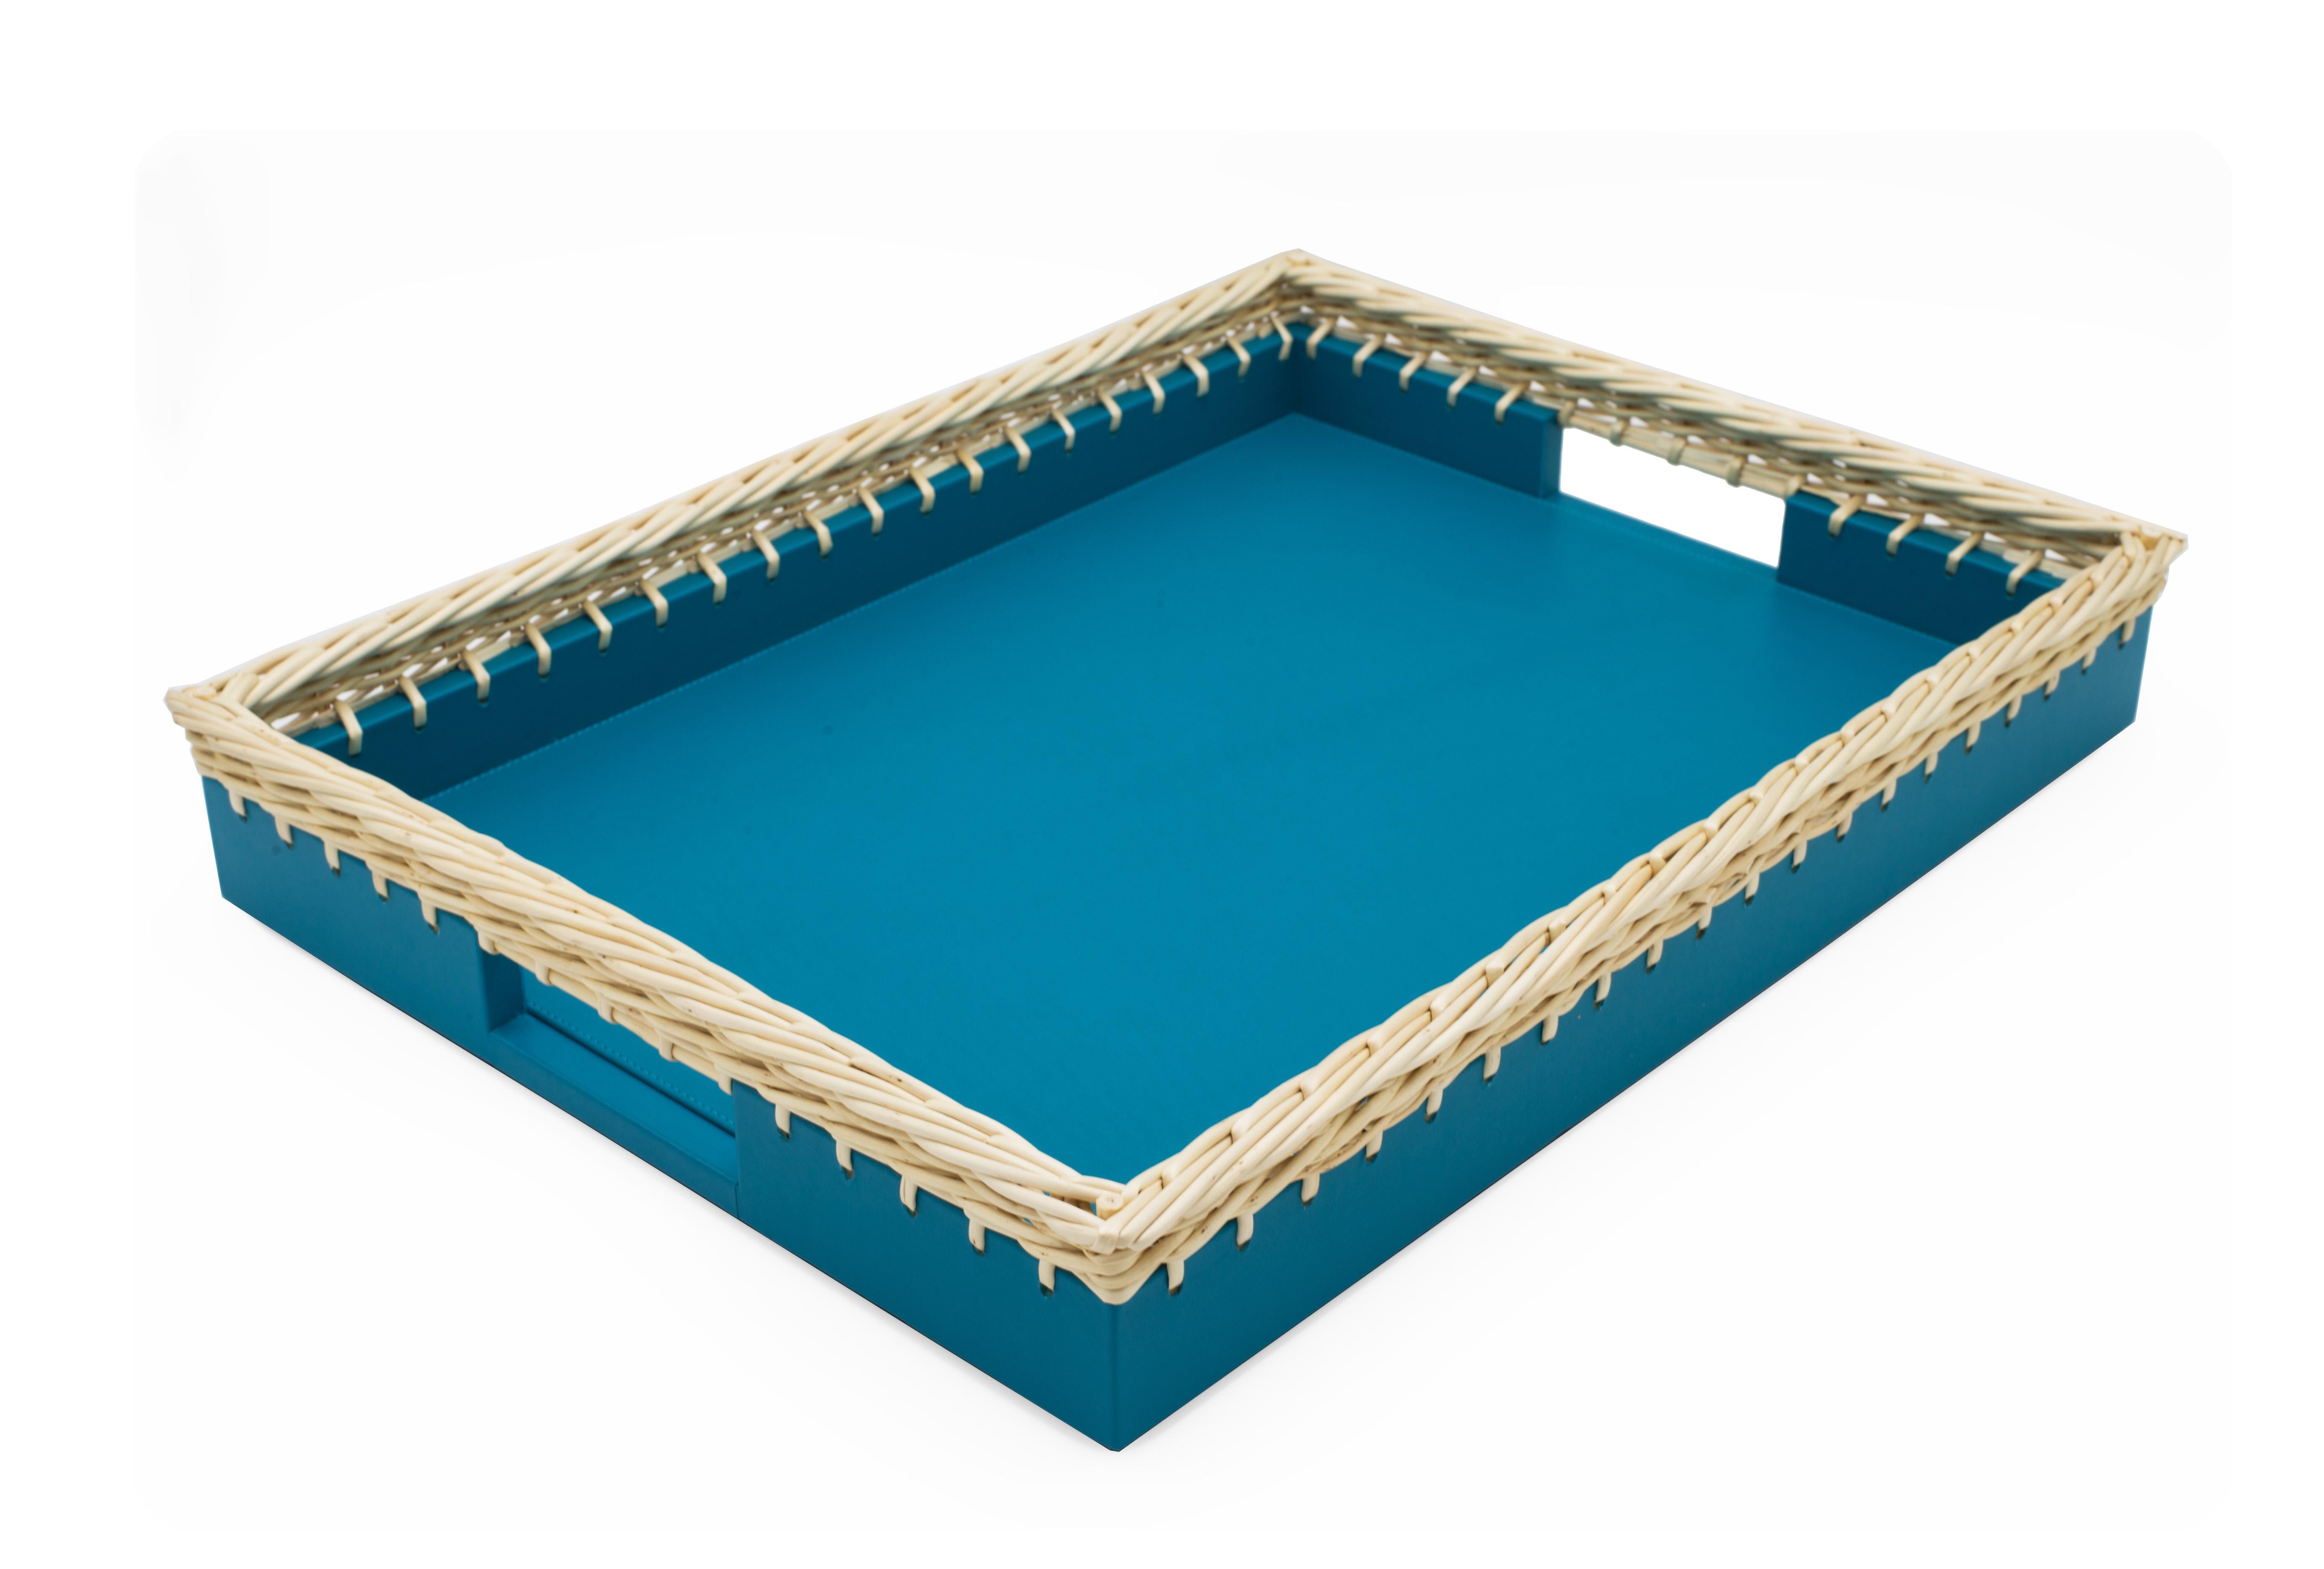 Contemporary rectangular blue leather tray with a woven wicker willow wood edge (Made in Italy).